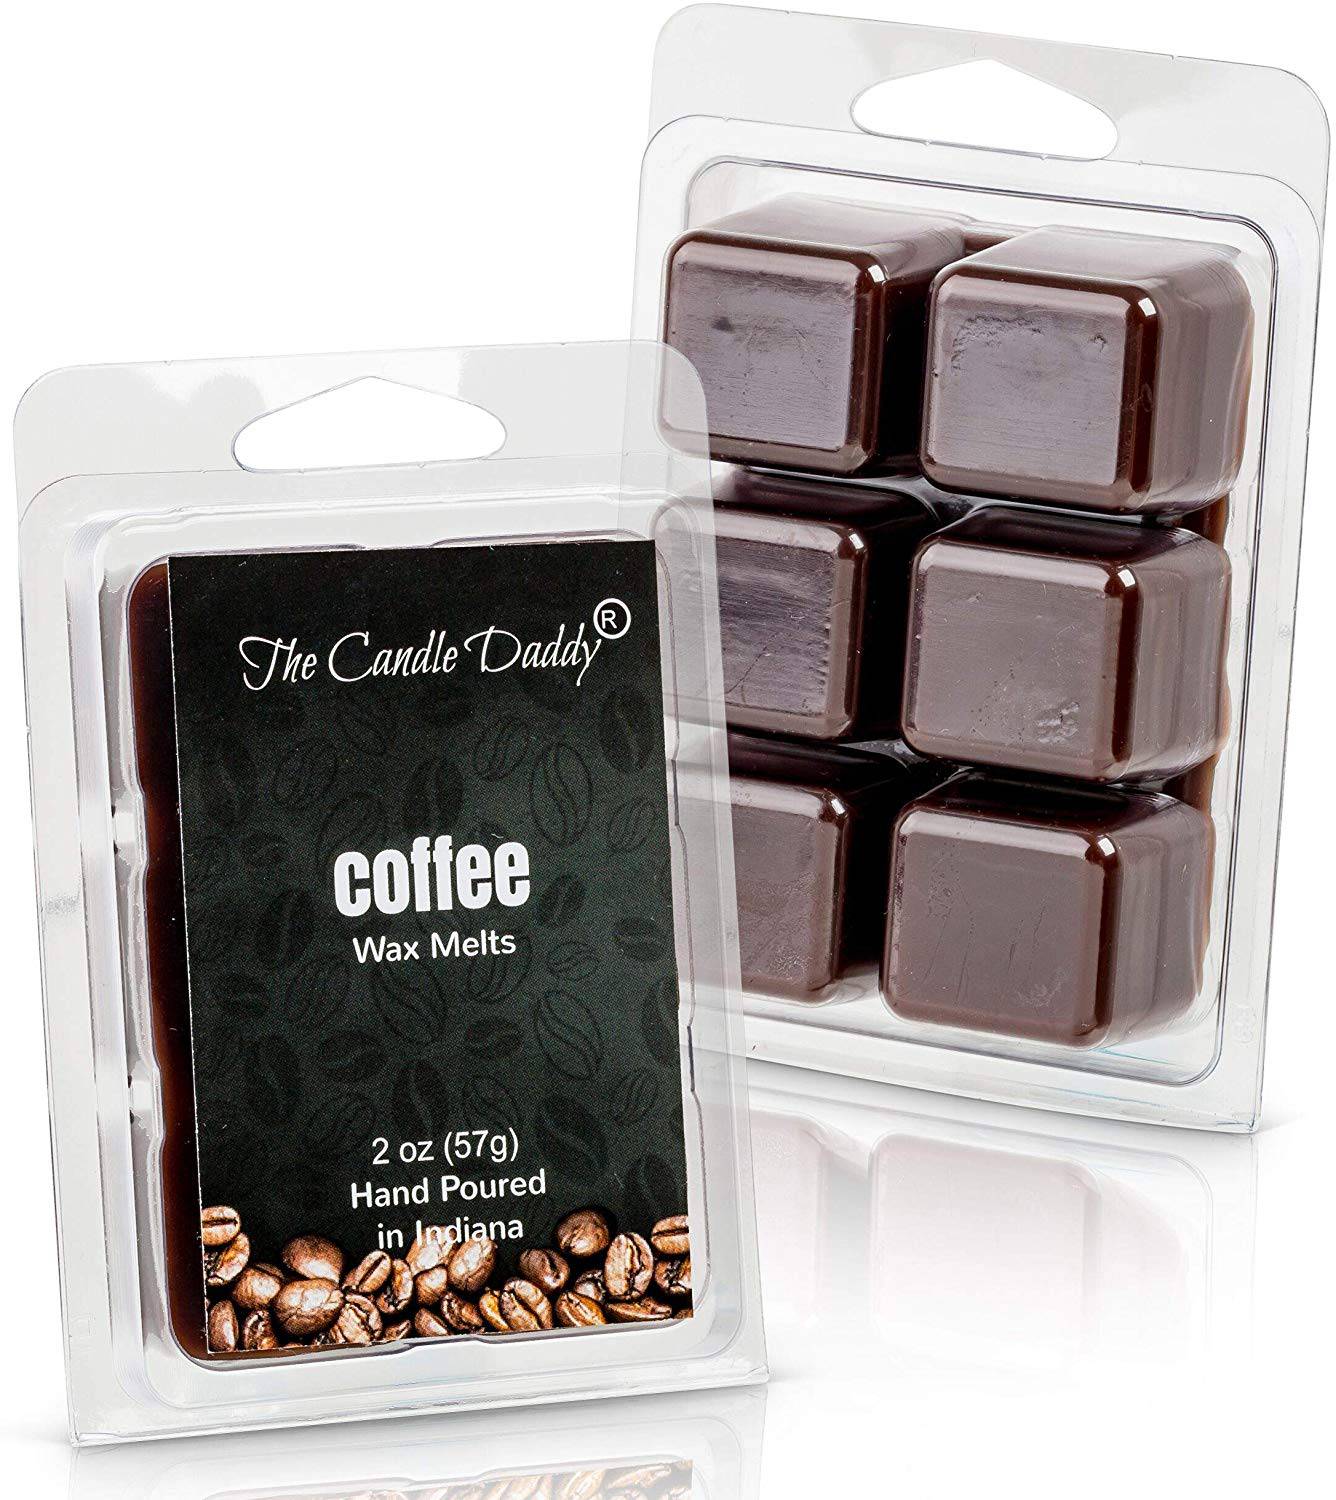 Coffee House Wax Melts – Candles and Creams